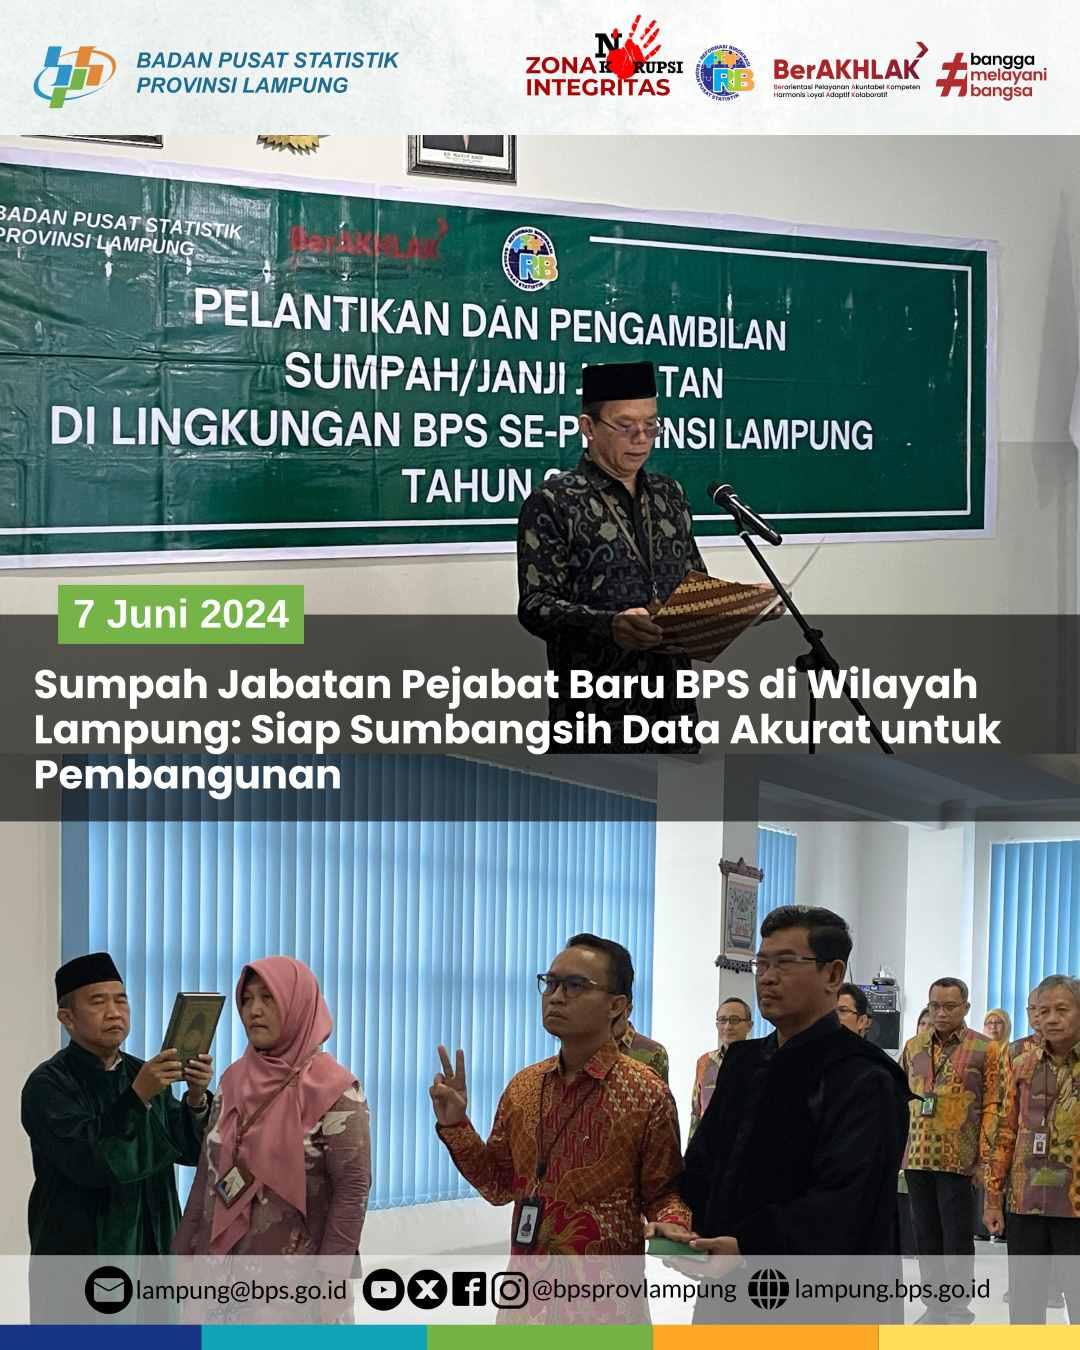 Oath of Office for New BPS-Statistics in the Lampung Province: Ready to Contribute 